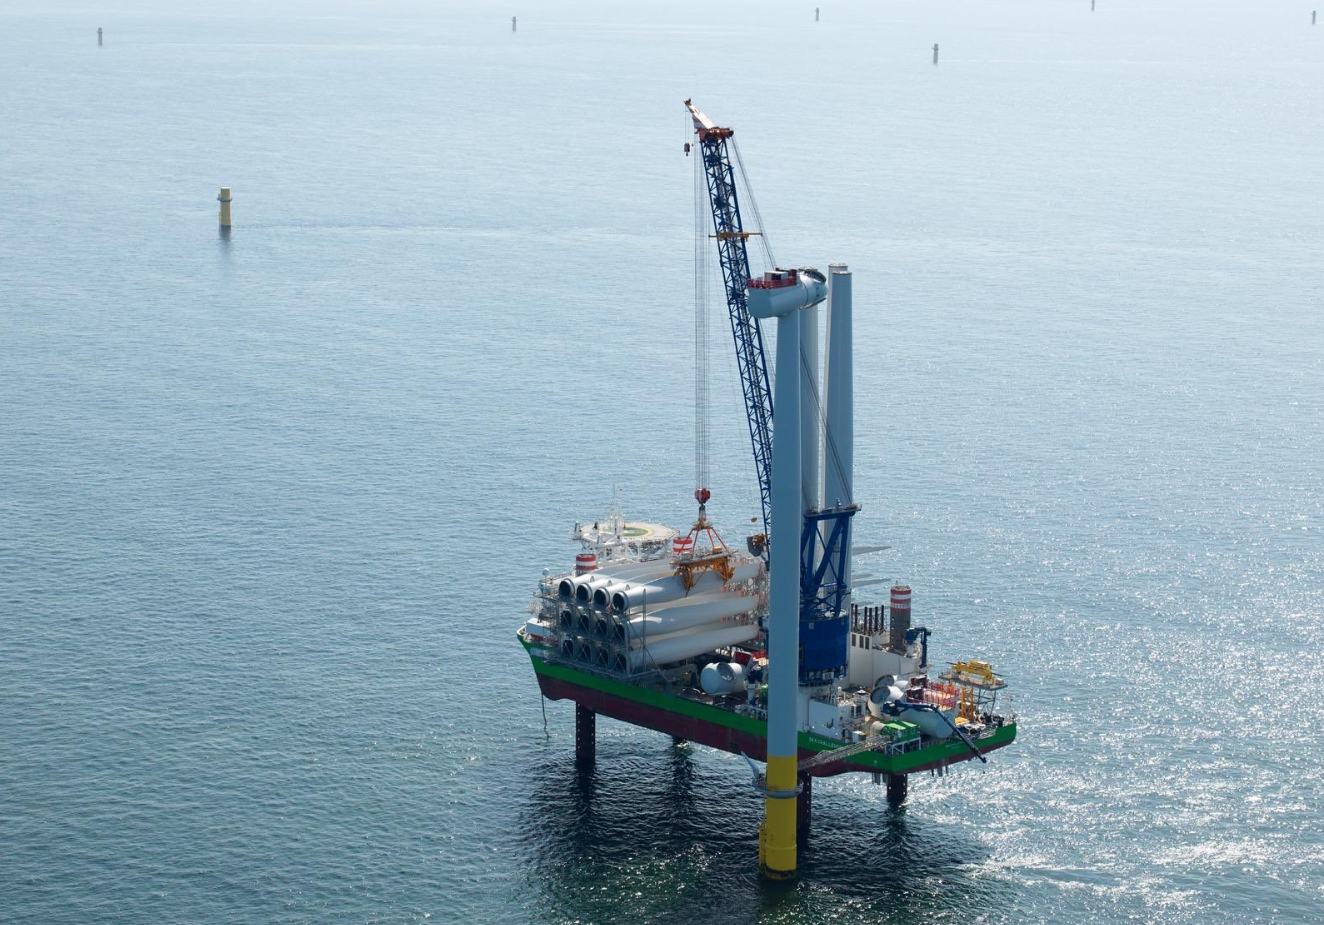 Wind turbine being installed at the Borssele 1 & 2 offshore wind farm.